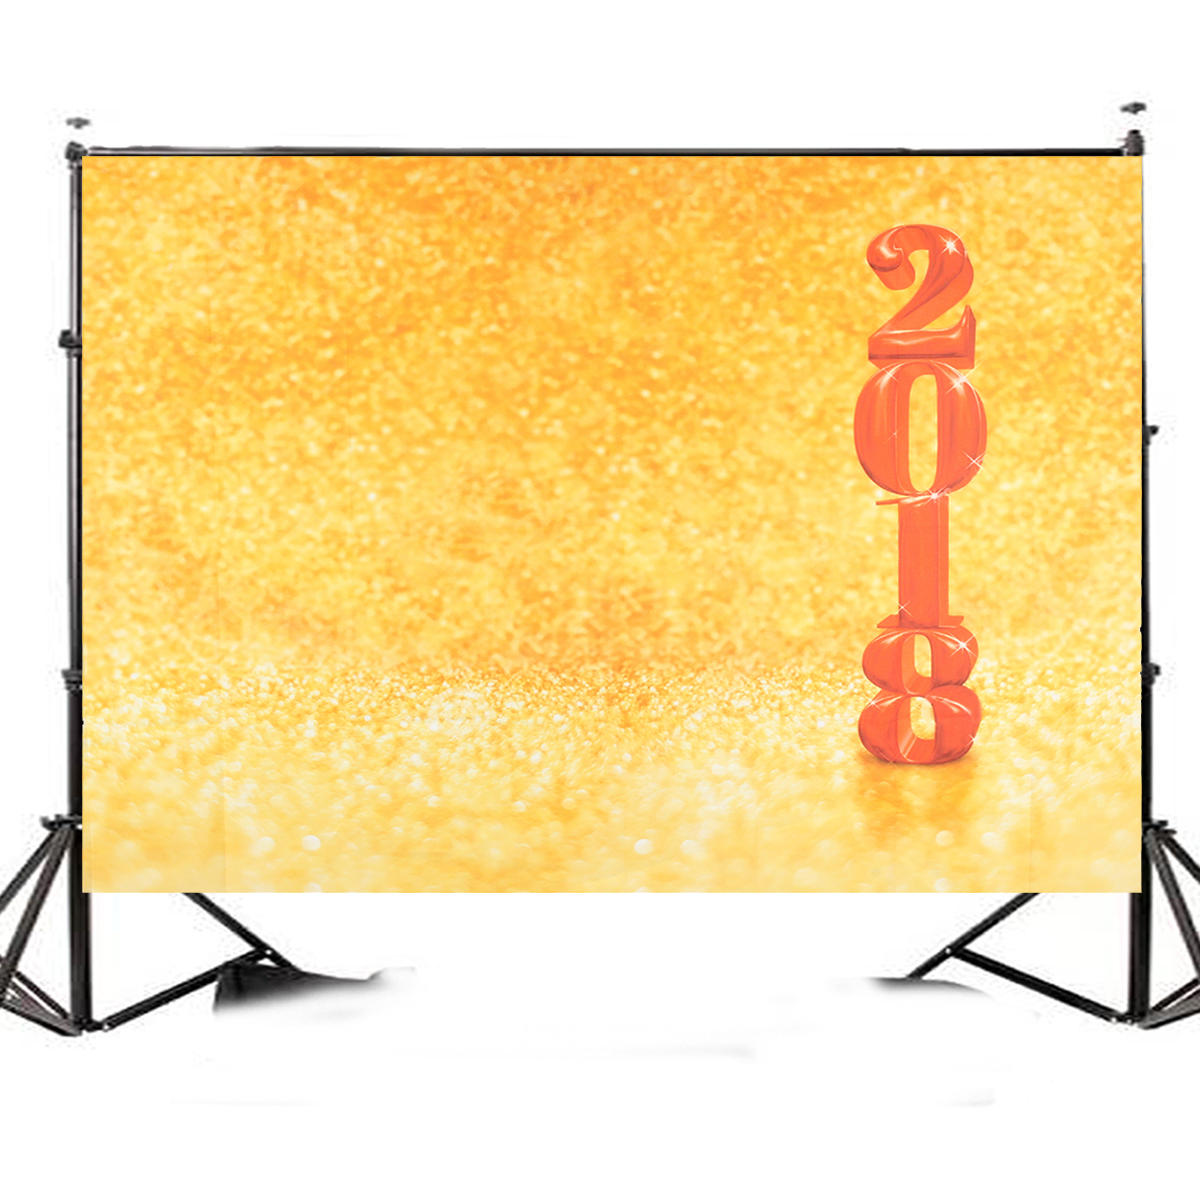 7x5ft New Year Golden Bright Stars Photography Backdrop Studio Prop Background